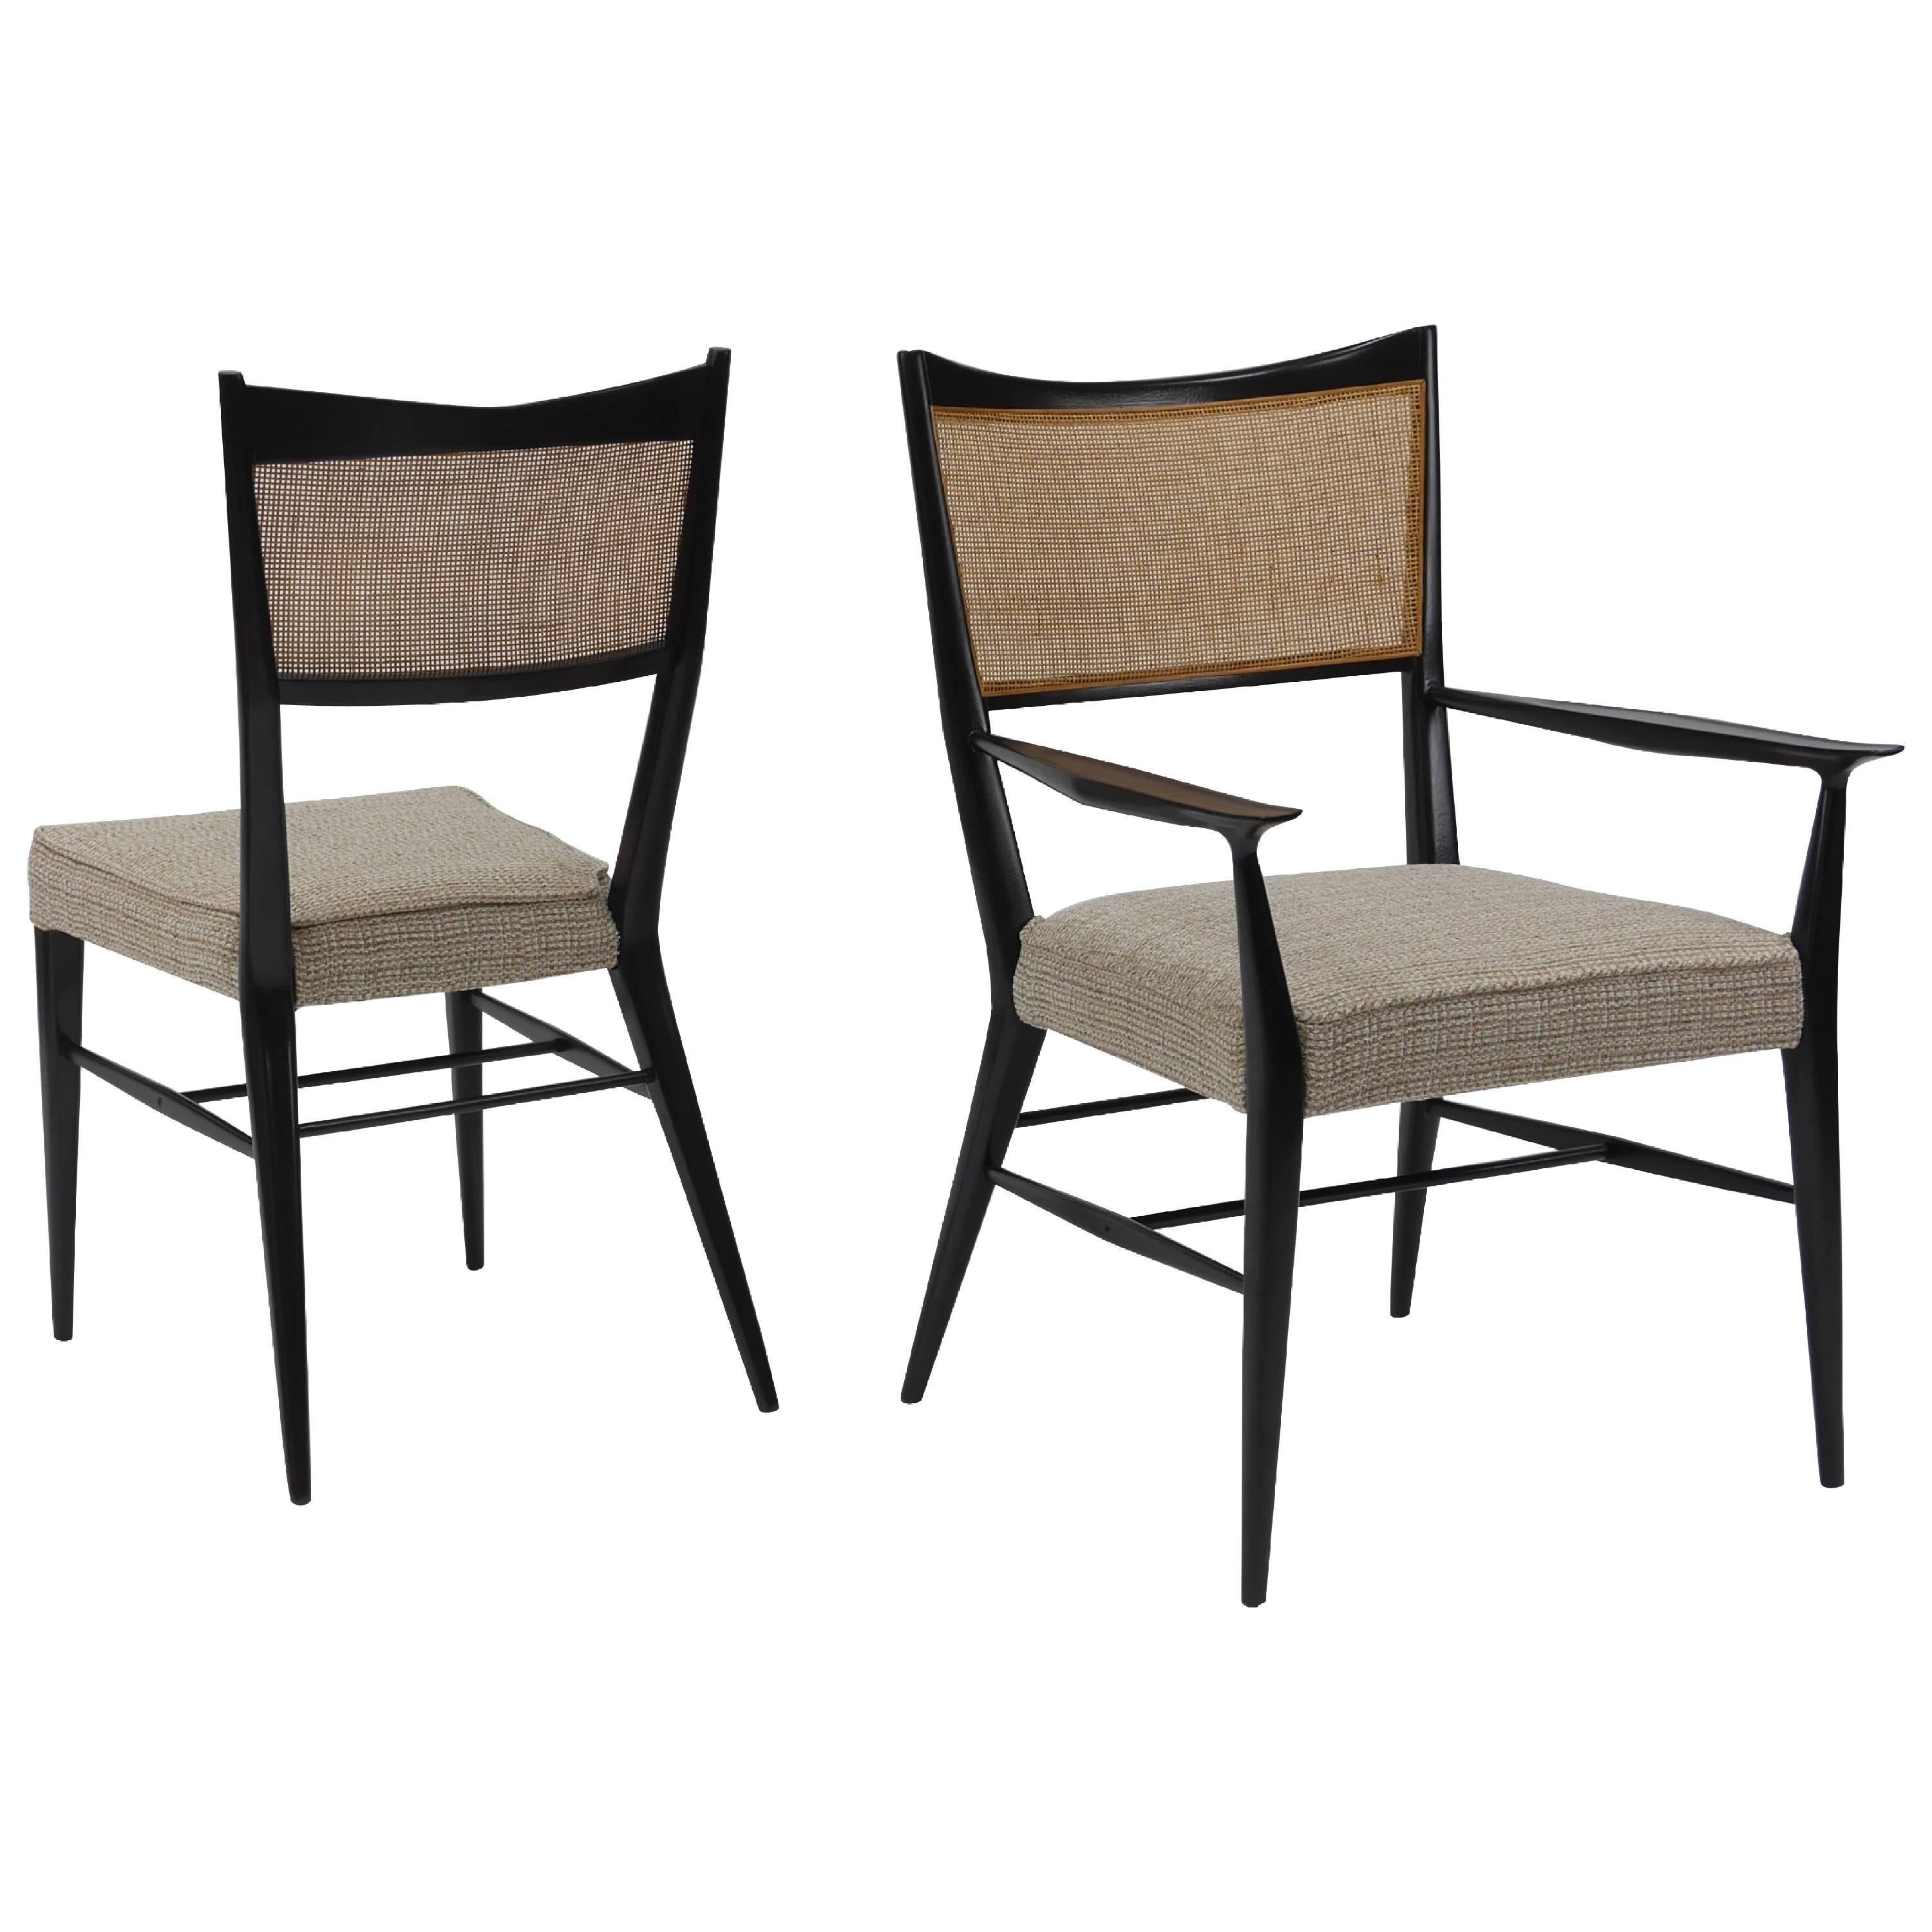 Eight Paul McCobb Irwin Collection Dining Chairs